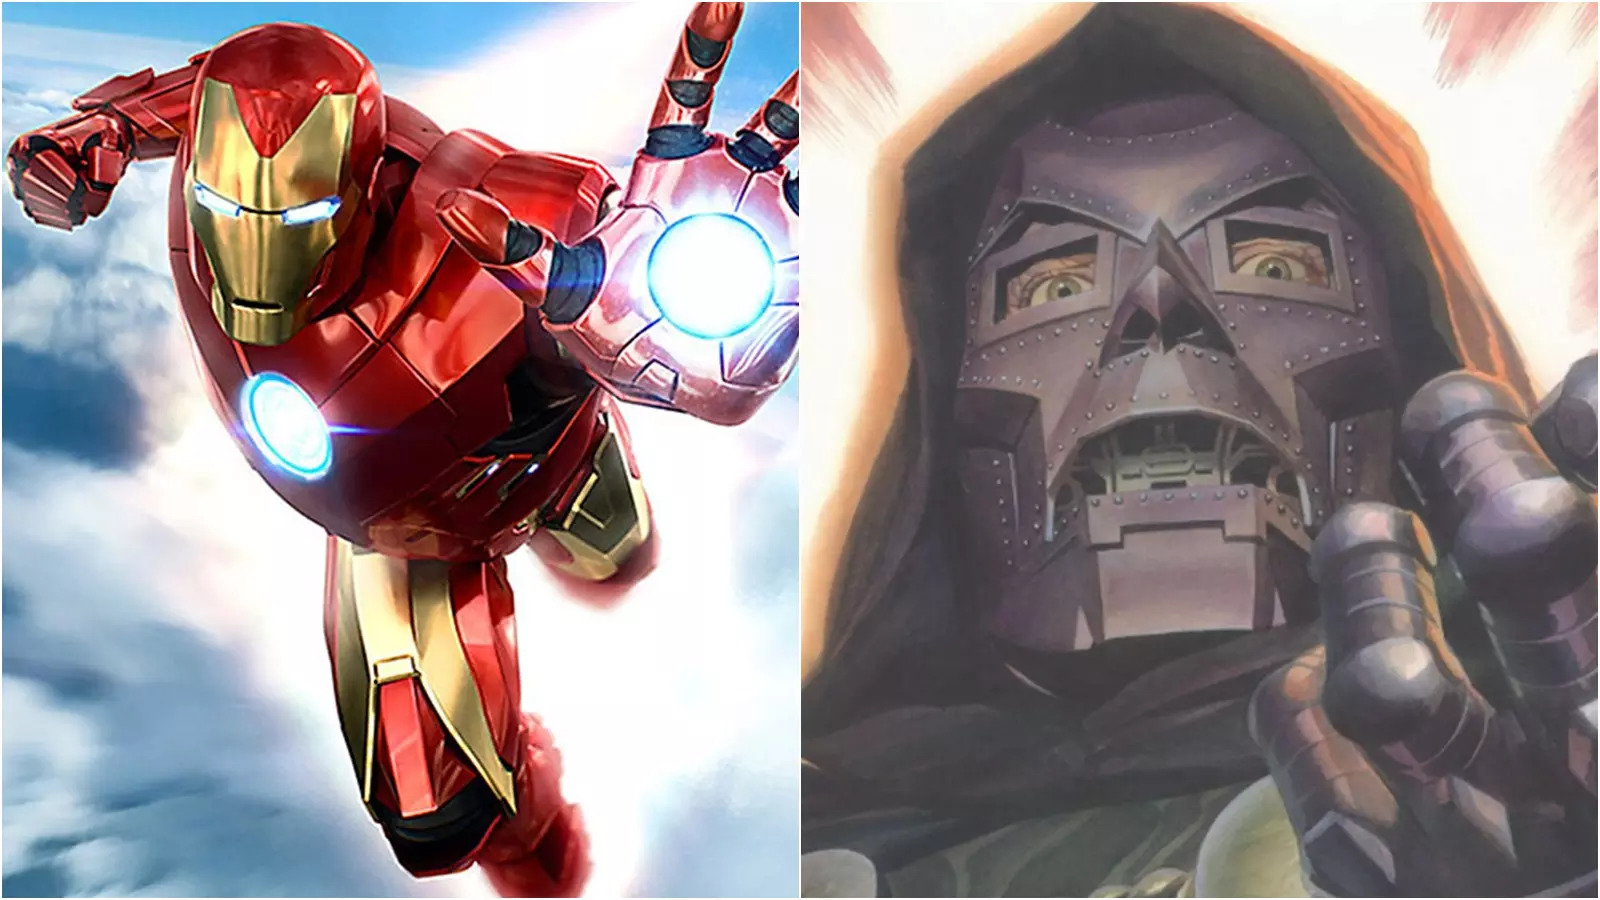 Iron Man And Doctor Doom SWITCH BODIES In One Marvel Comic Is That How Robert Downey Jr Will Play Two MCU Roles